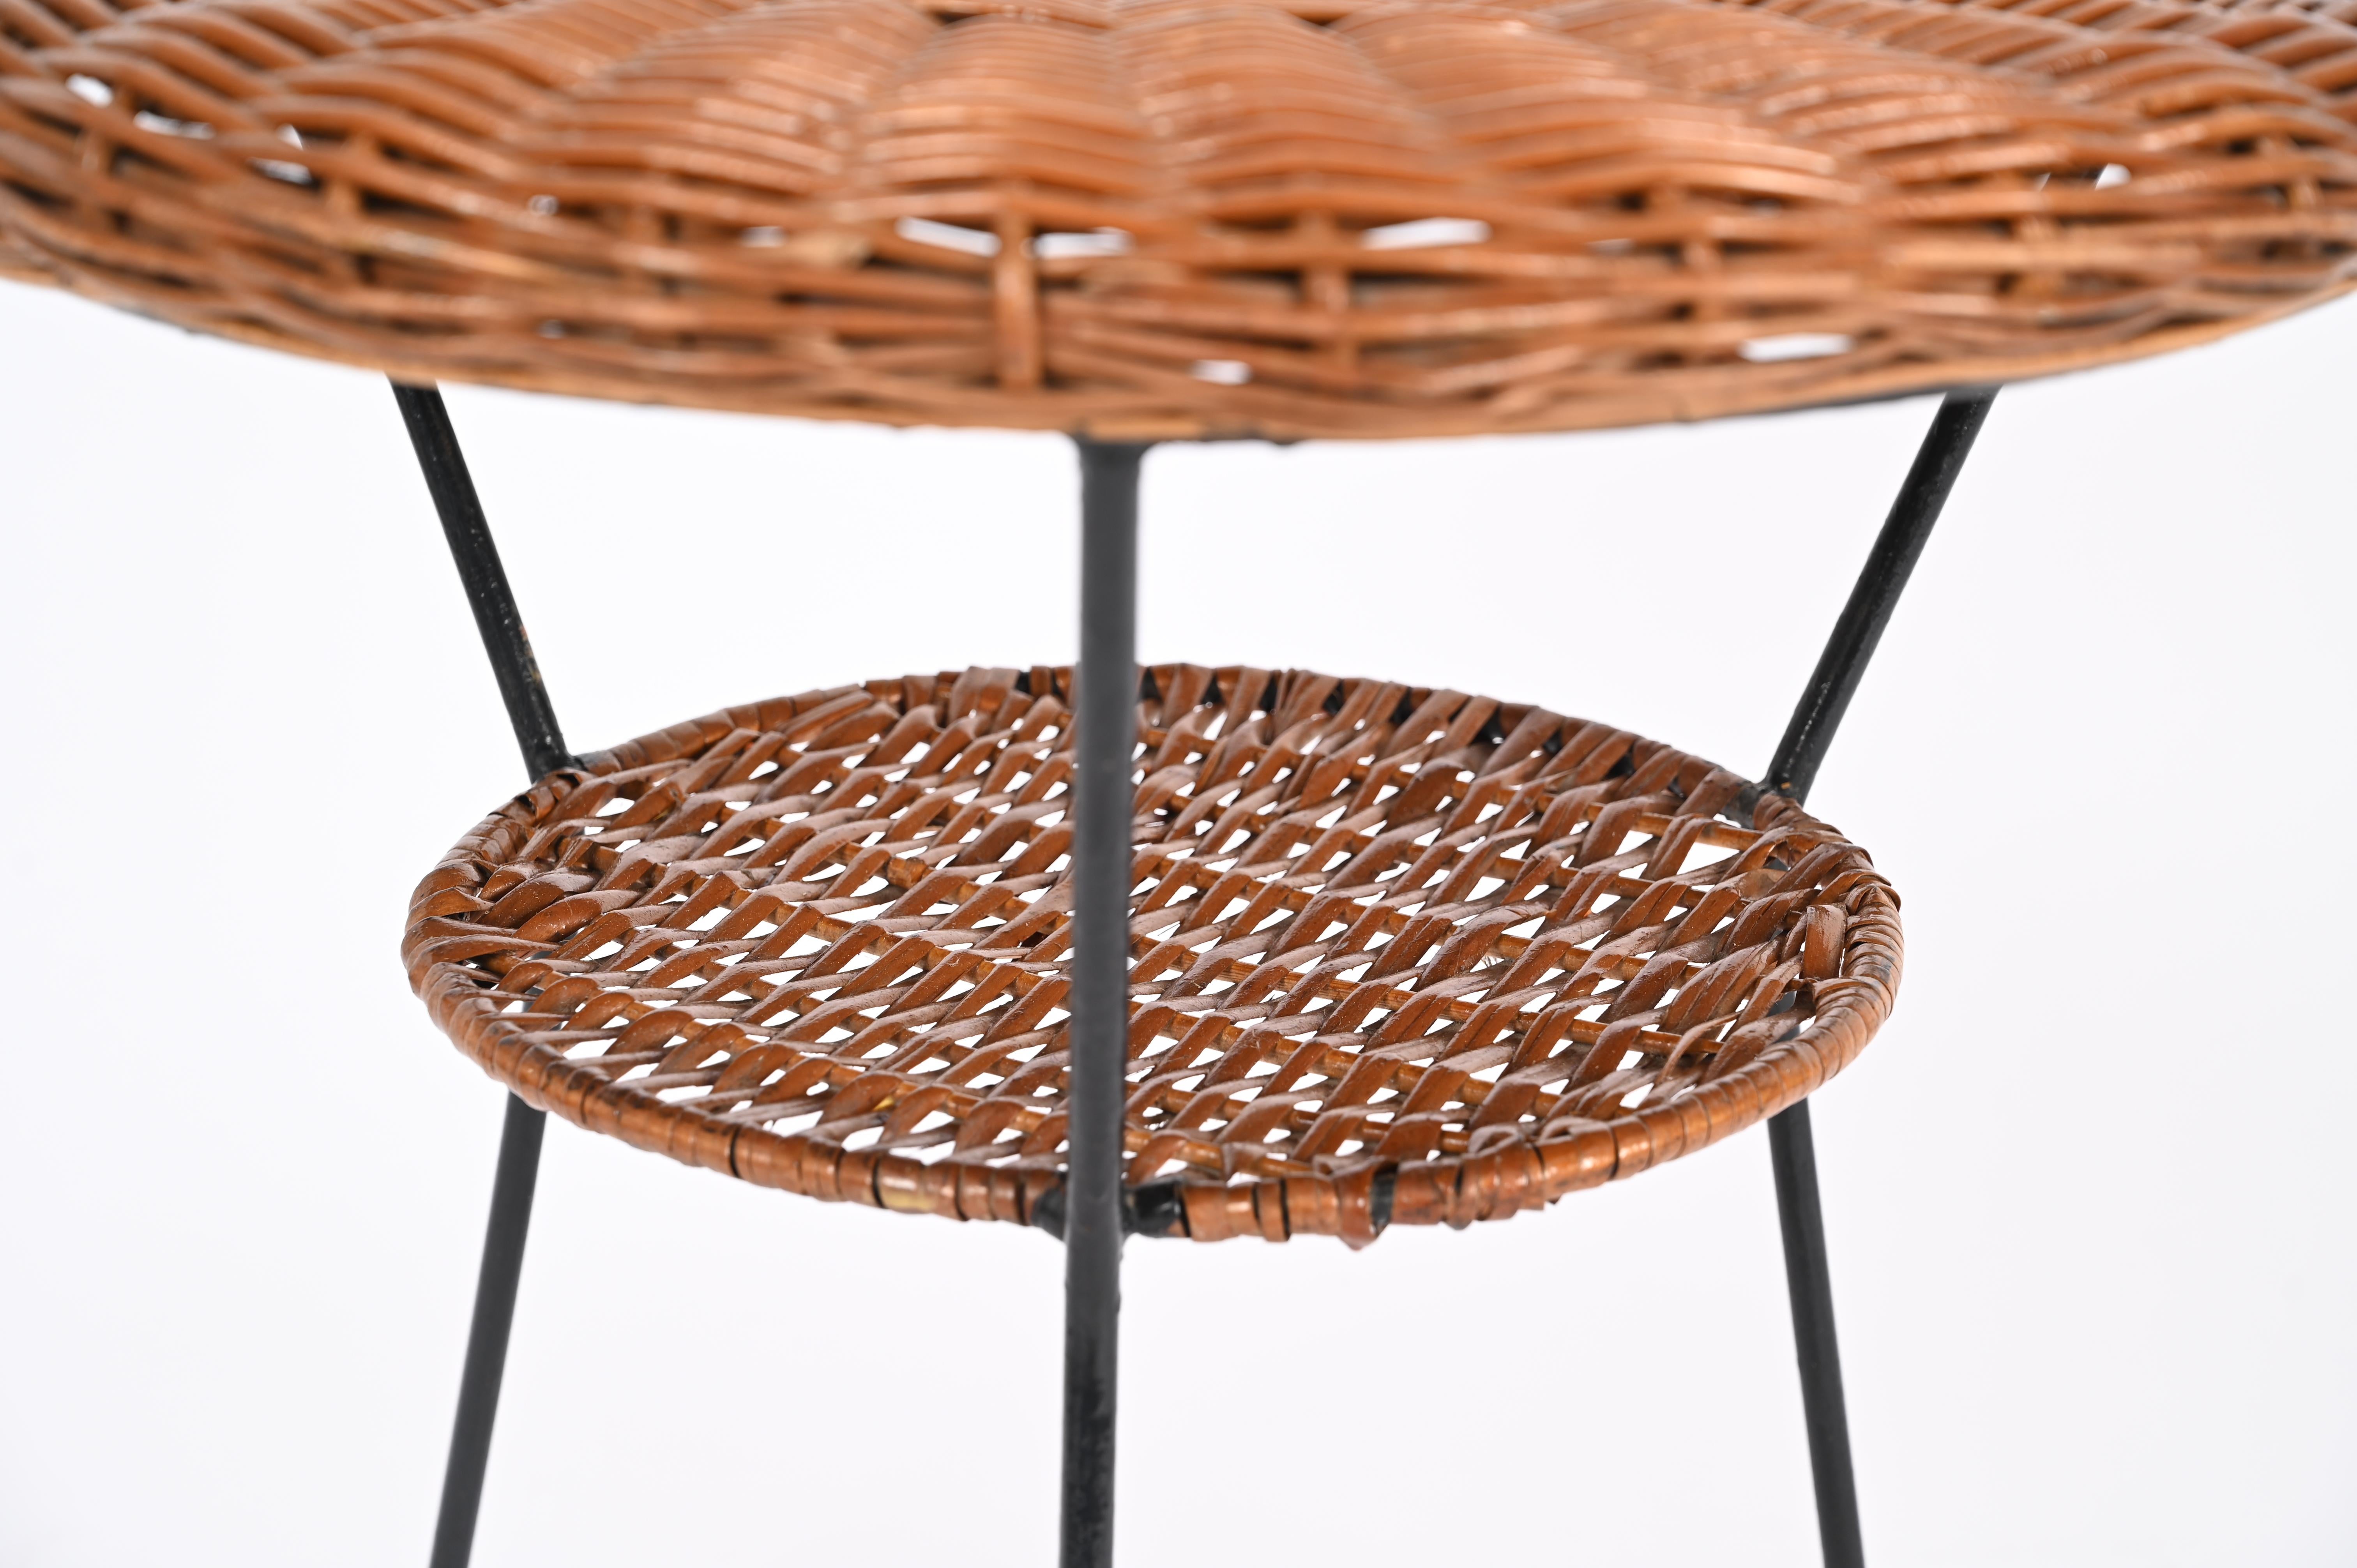 Woven Rattan, Wicker and Iron Two-Tier Round Coffee Table, Matégot, France 1960s In Good Condition For Sale In Roma, IT